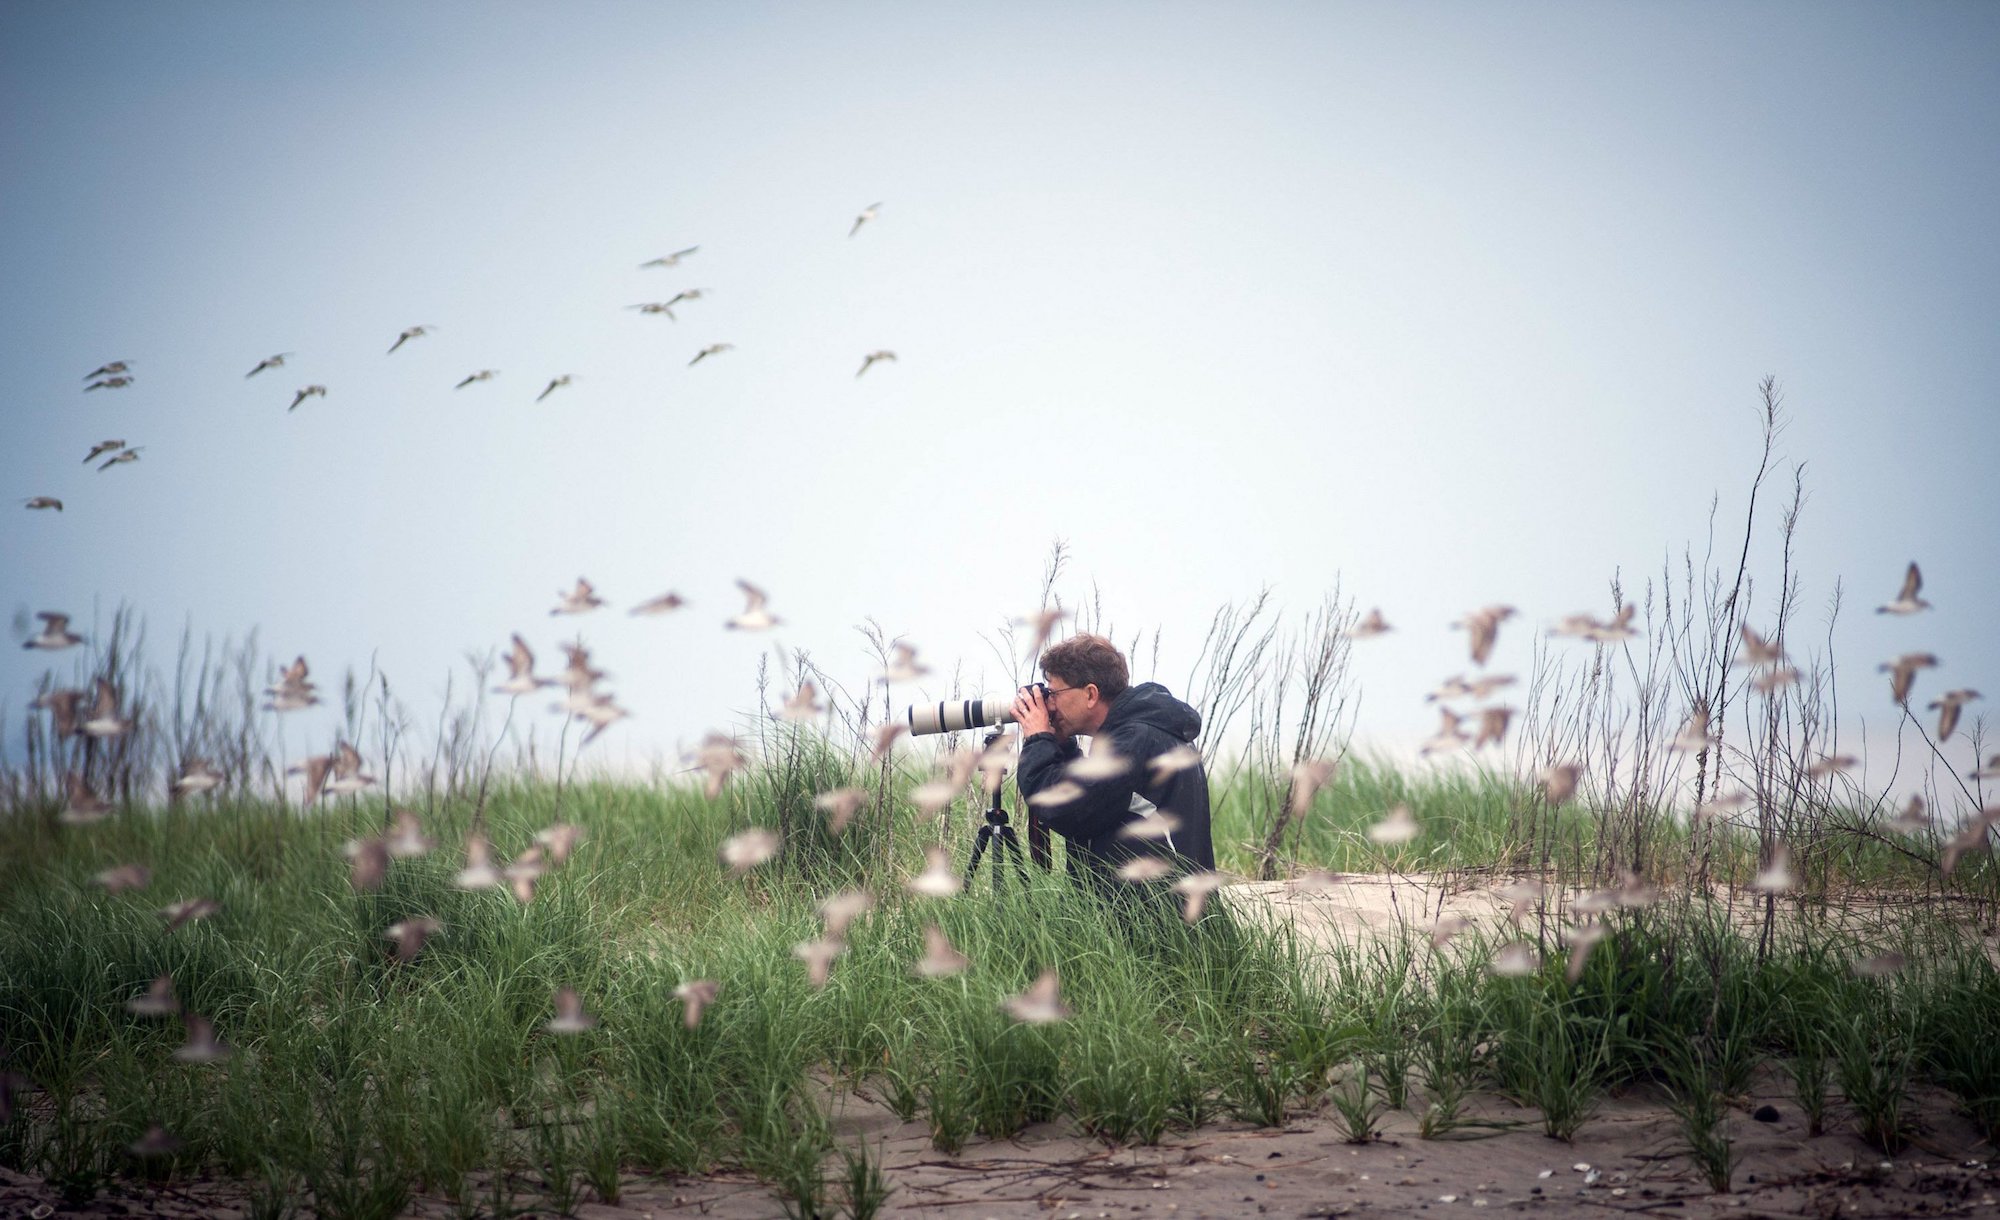 a man crouches holding camera as a flock of birds flies past near to the ground